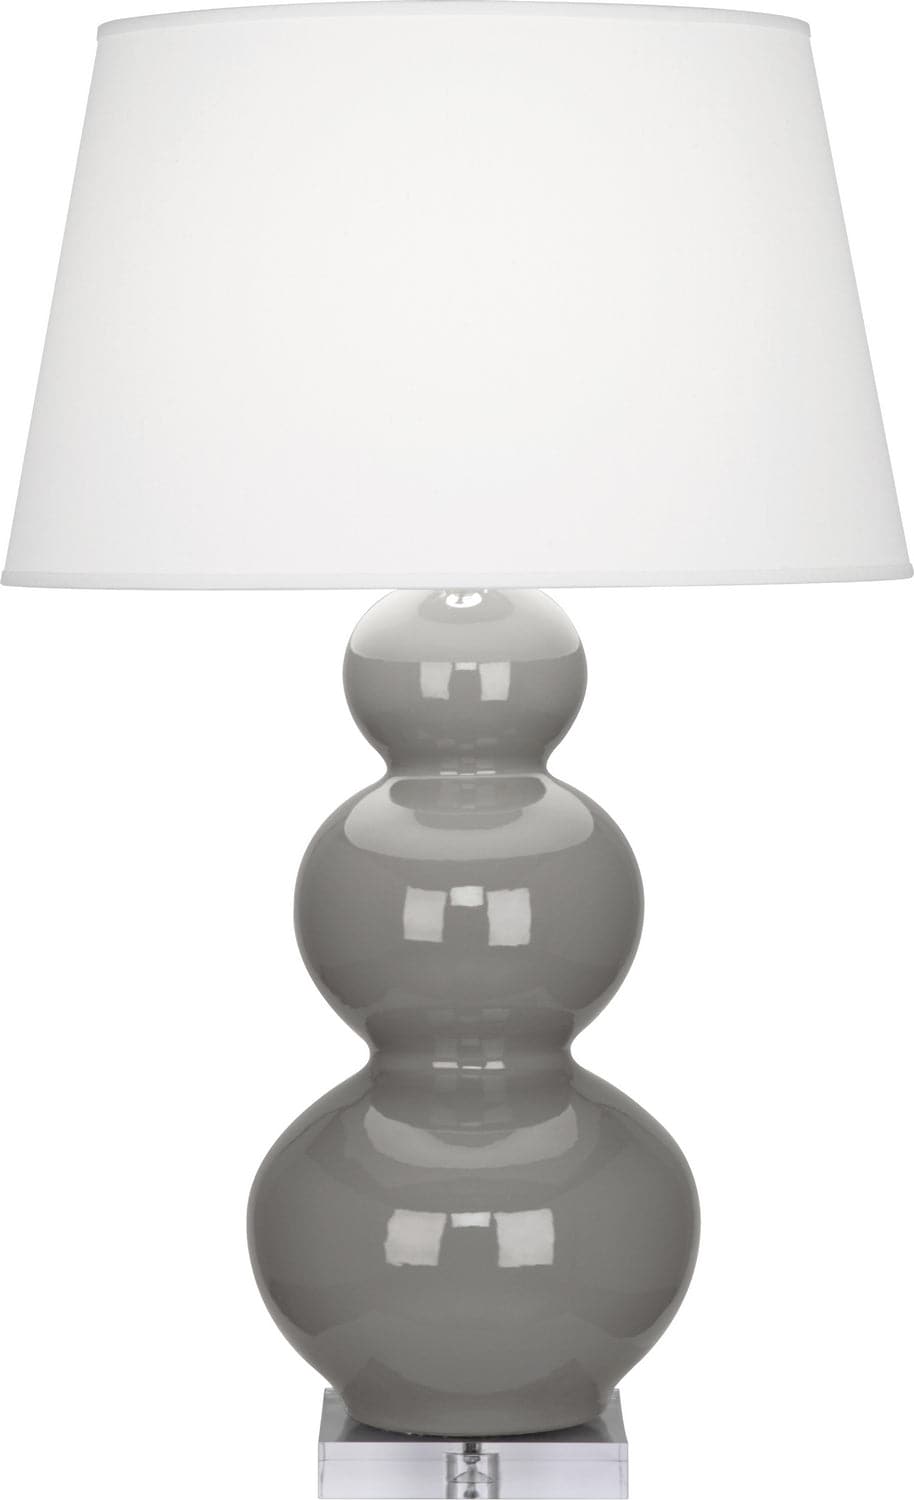 Robert Abbey - A359X - One Light Table Lamp - Triple Gourd - Smoky Taupe Glazed w/Lucite Base